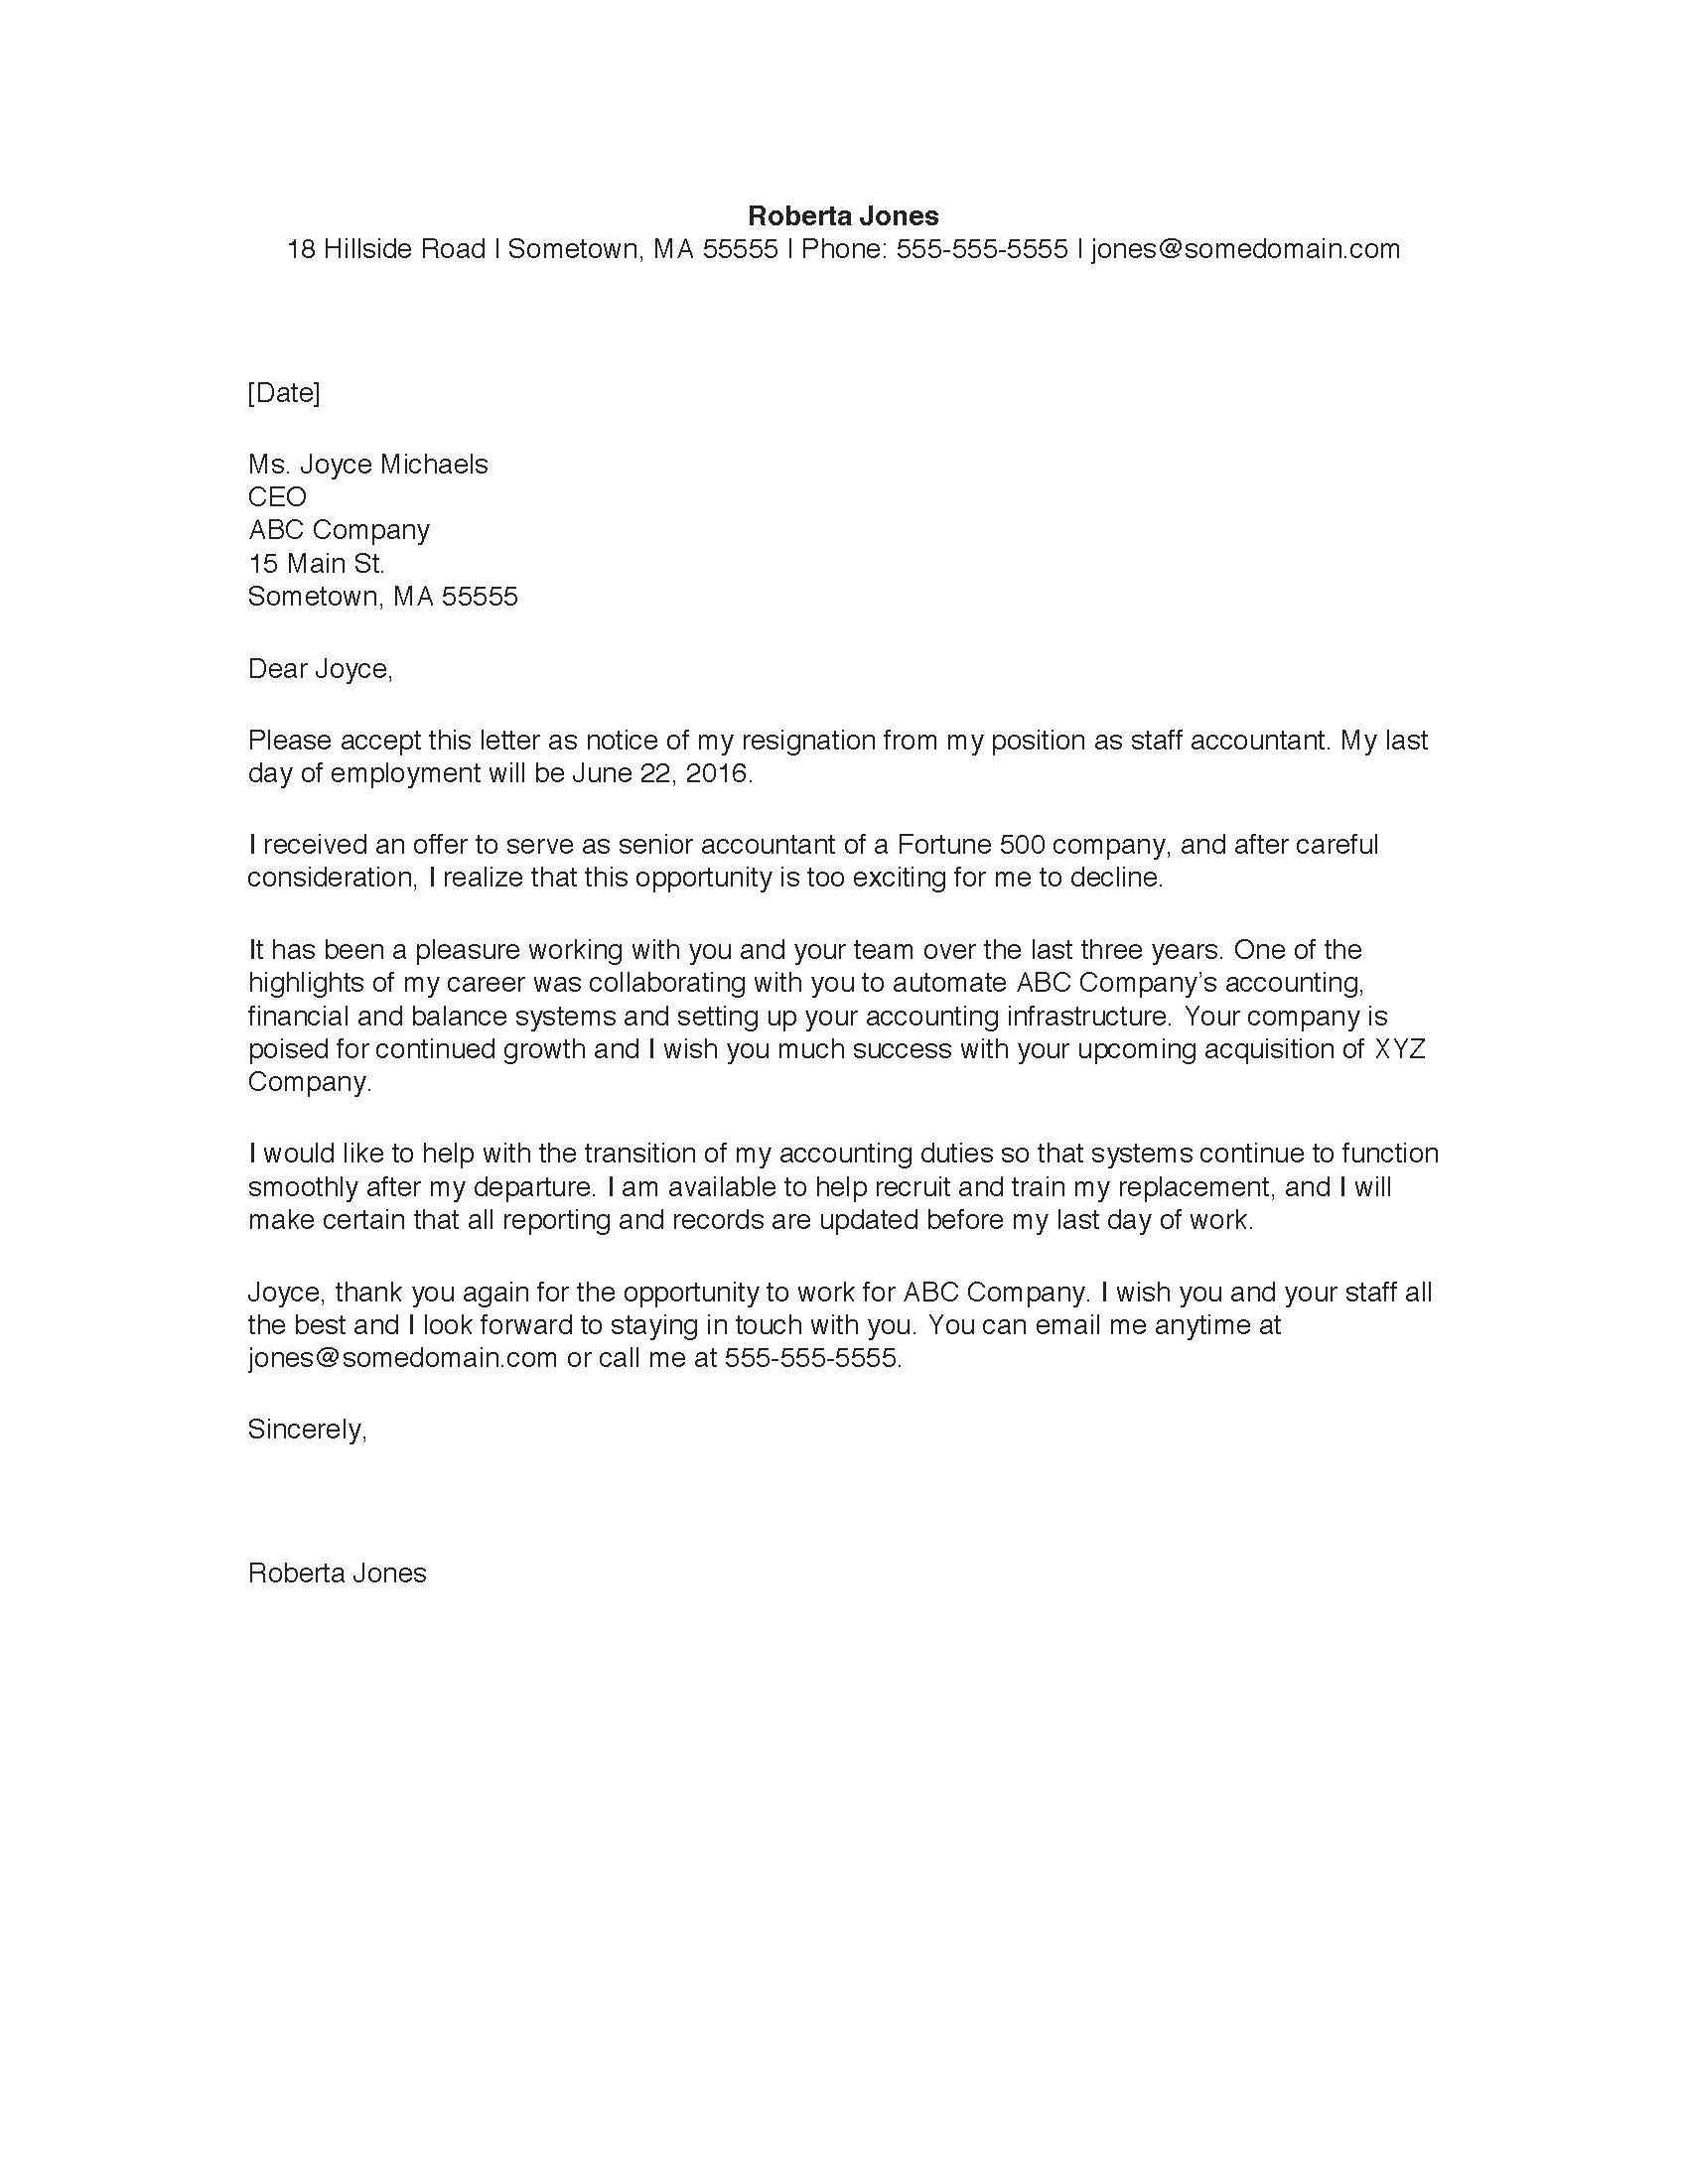 Sample Letter to Resume Work after Leave How to Write A Great Resignation Letter Monster.com